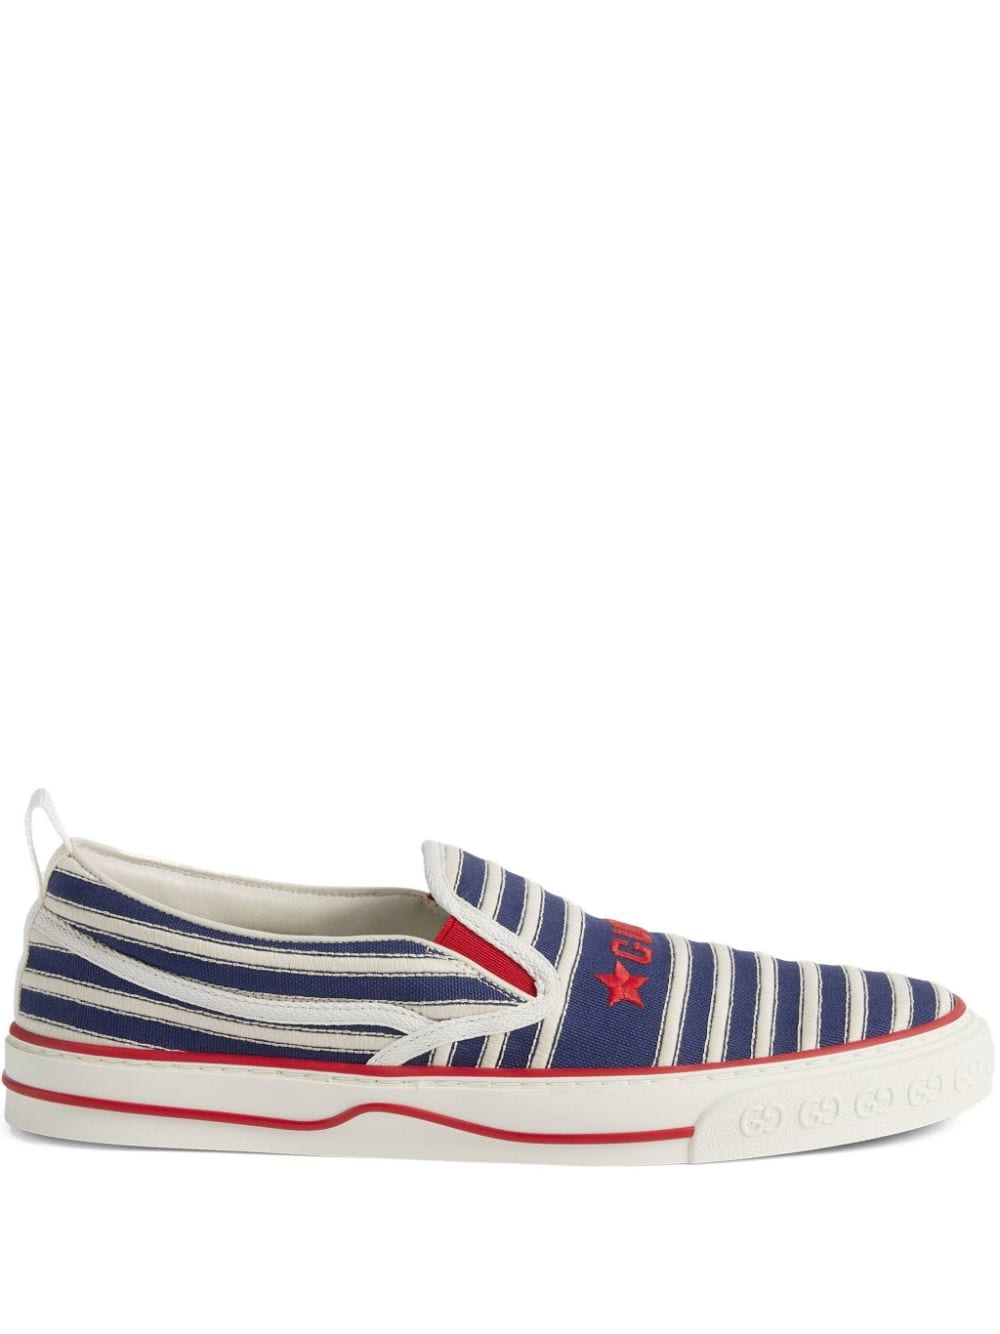 1977 striped slip-on trainers